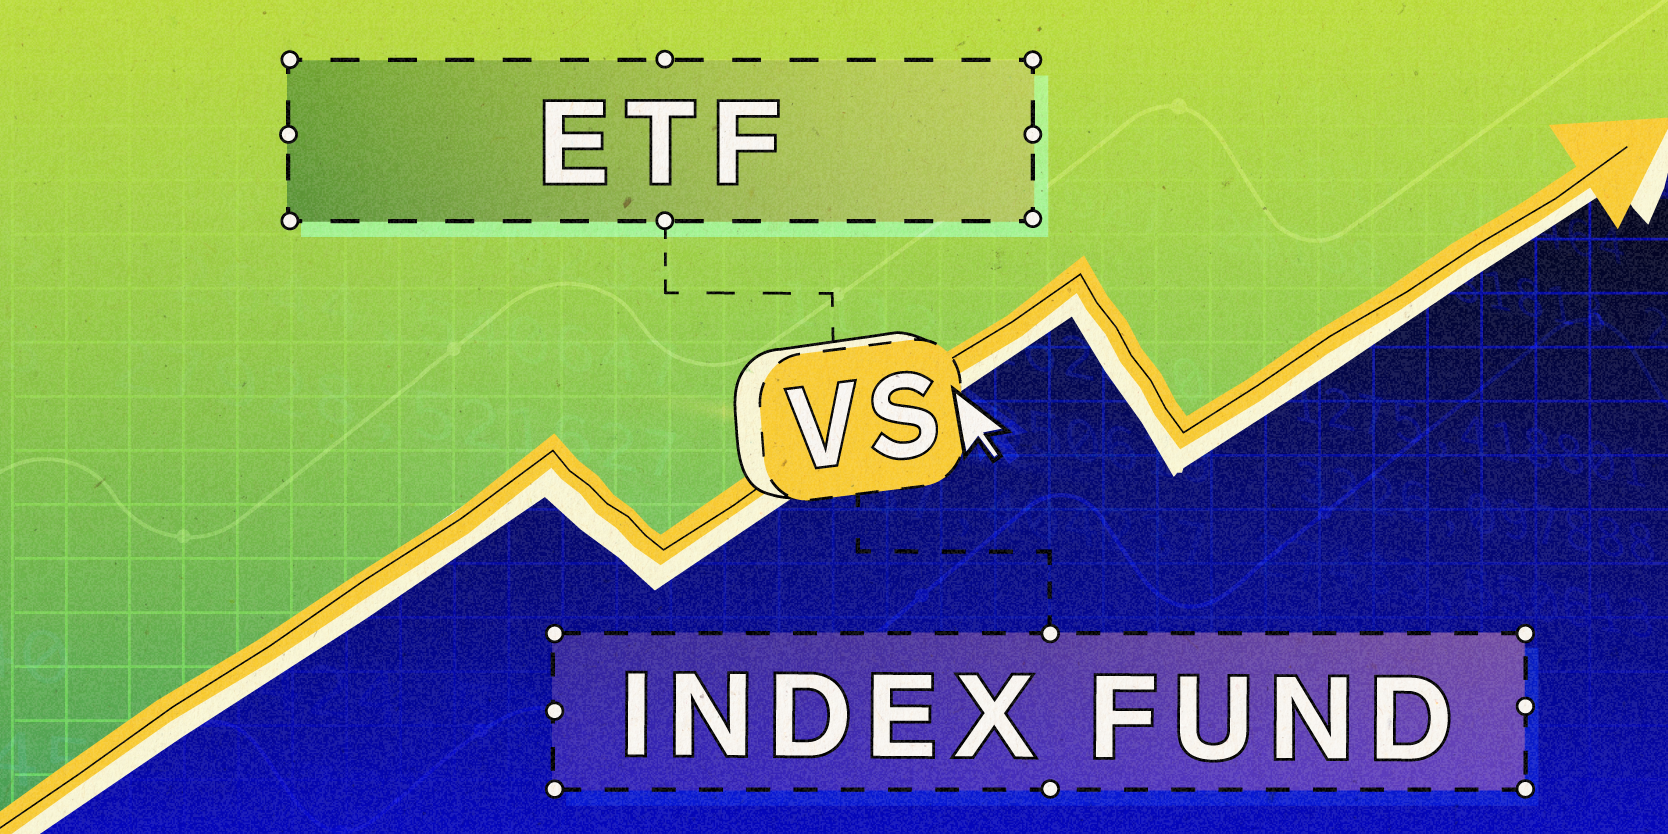 etf vs index fund, divided by an upwards trending arrow on investing themed background